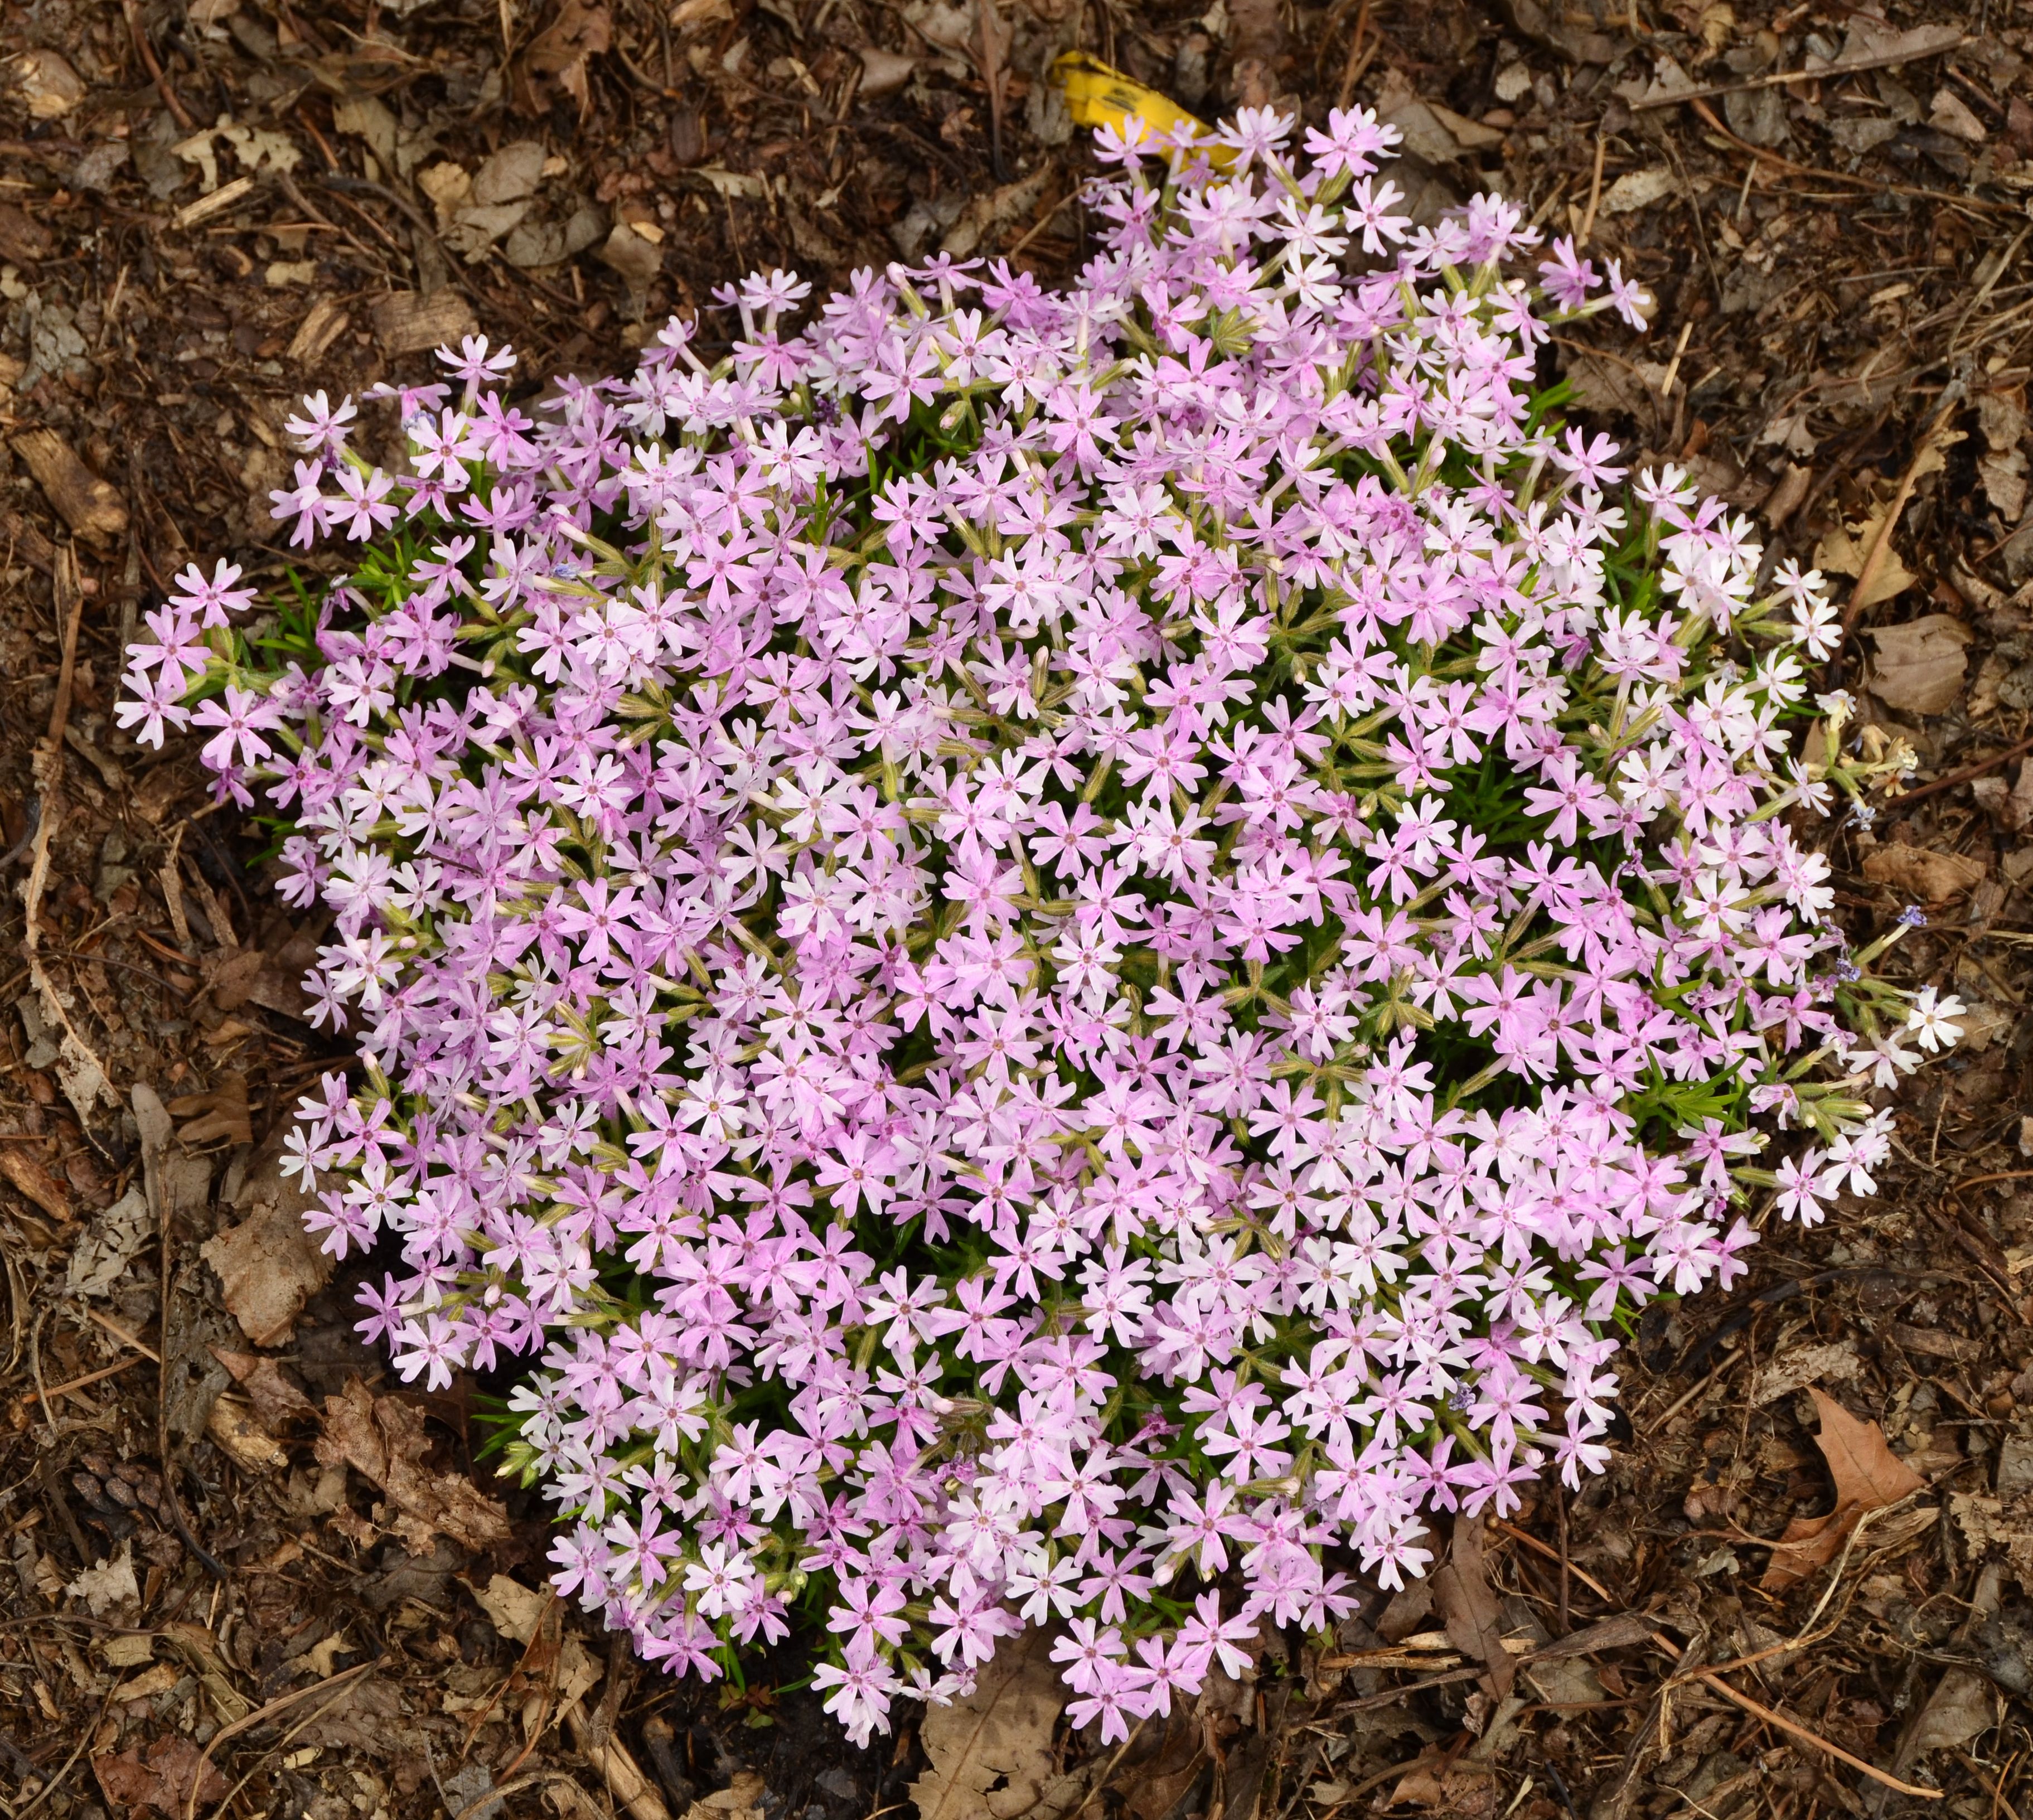 images/plants/phlox/phl-perfectly-puzzling/phl-perfectly-puzzling-0002.jpg